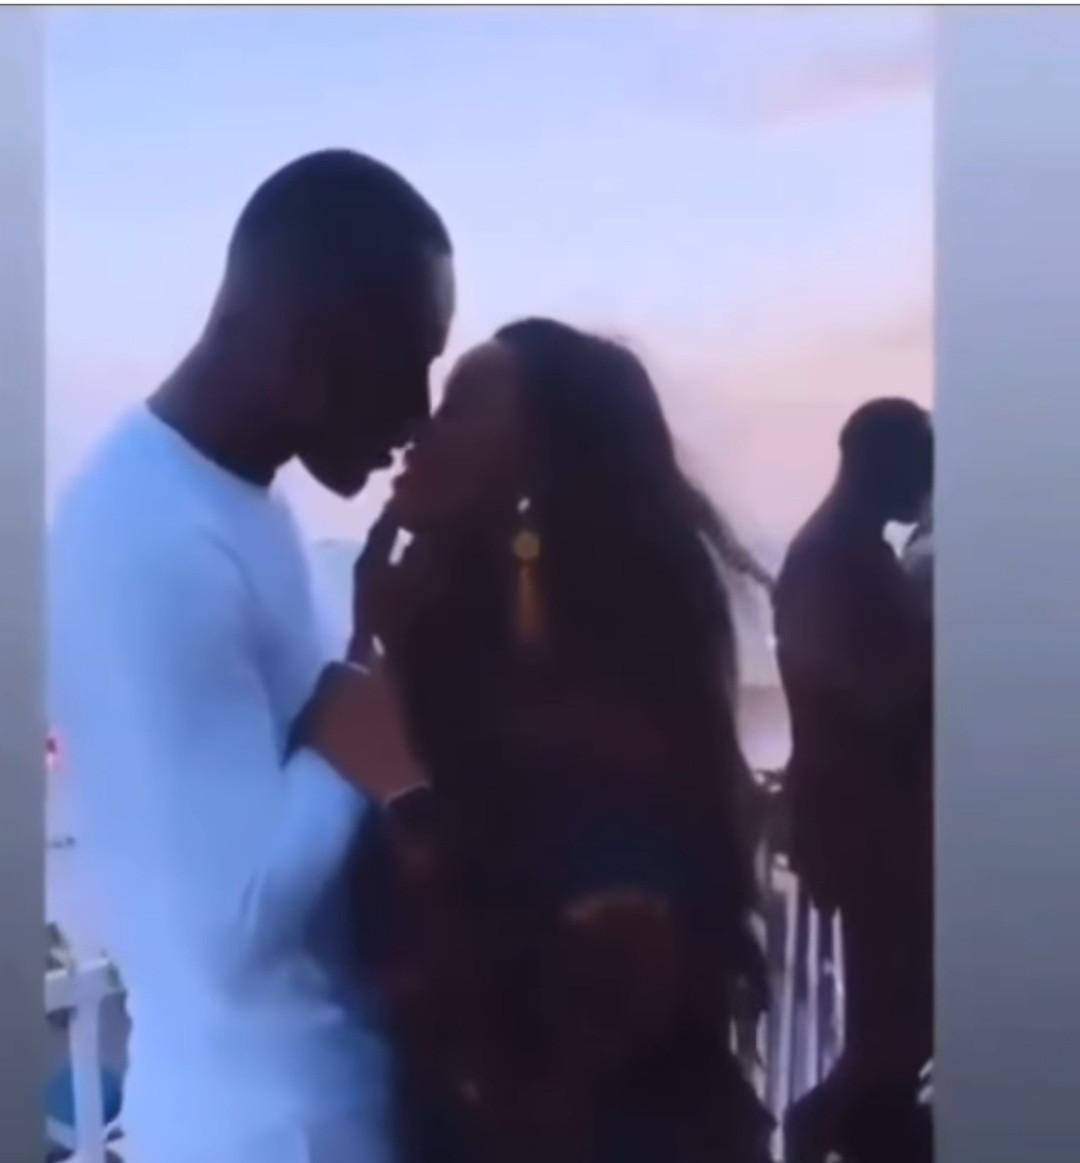 "They look good together" - Reactions as Timini Egbuson and Cee-C are spotted kissing (Video)